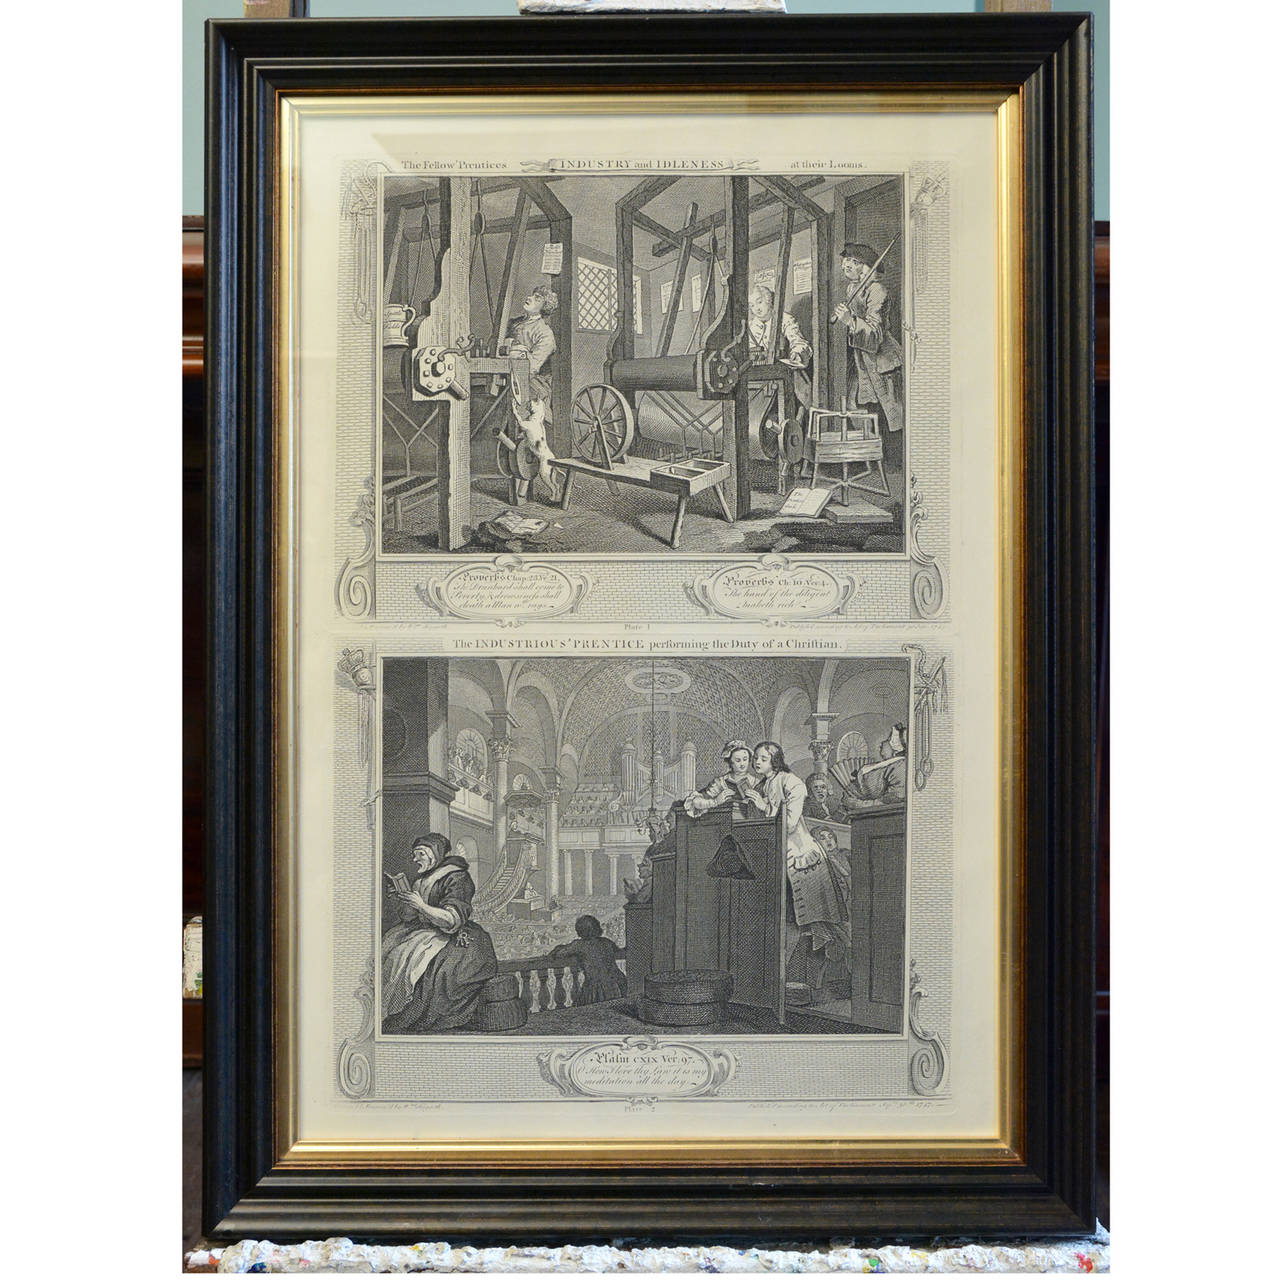 A set of seven original copper-engraved prints of Industry and Idleness by William Hogarth (1697-1764), later framed.  The final edition from Hogarth's original plates, published by Baldwin, Cradock & Joy in 1822.

A moral warning, intending to